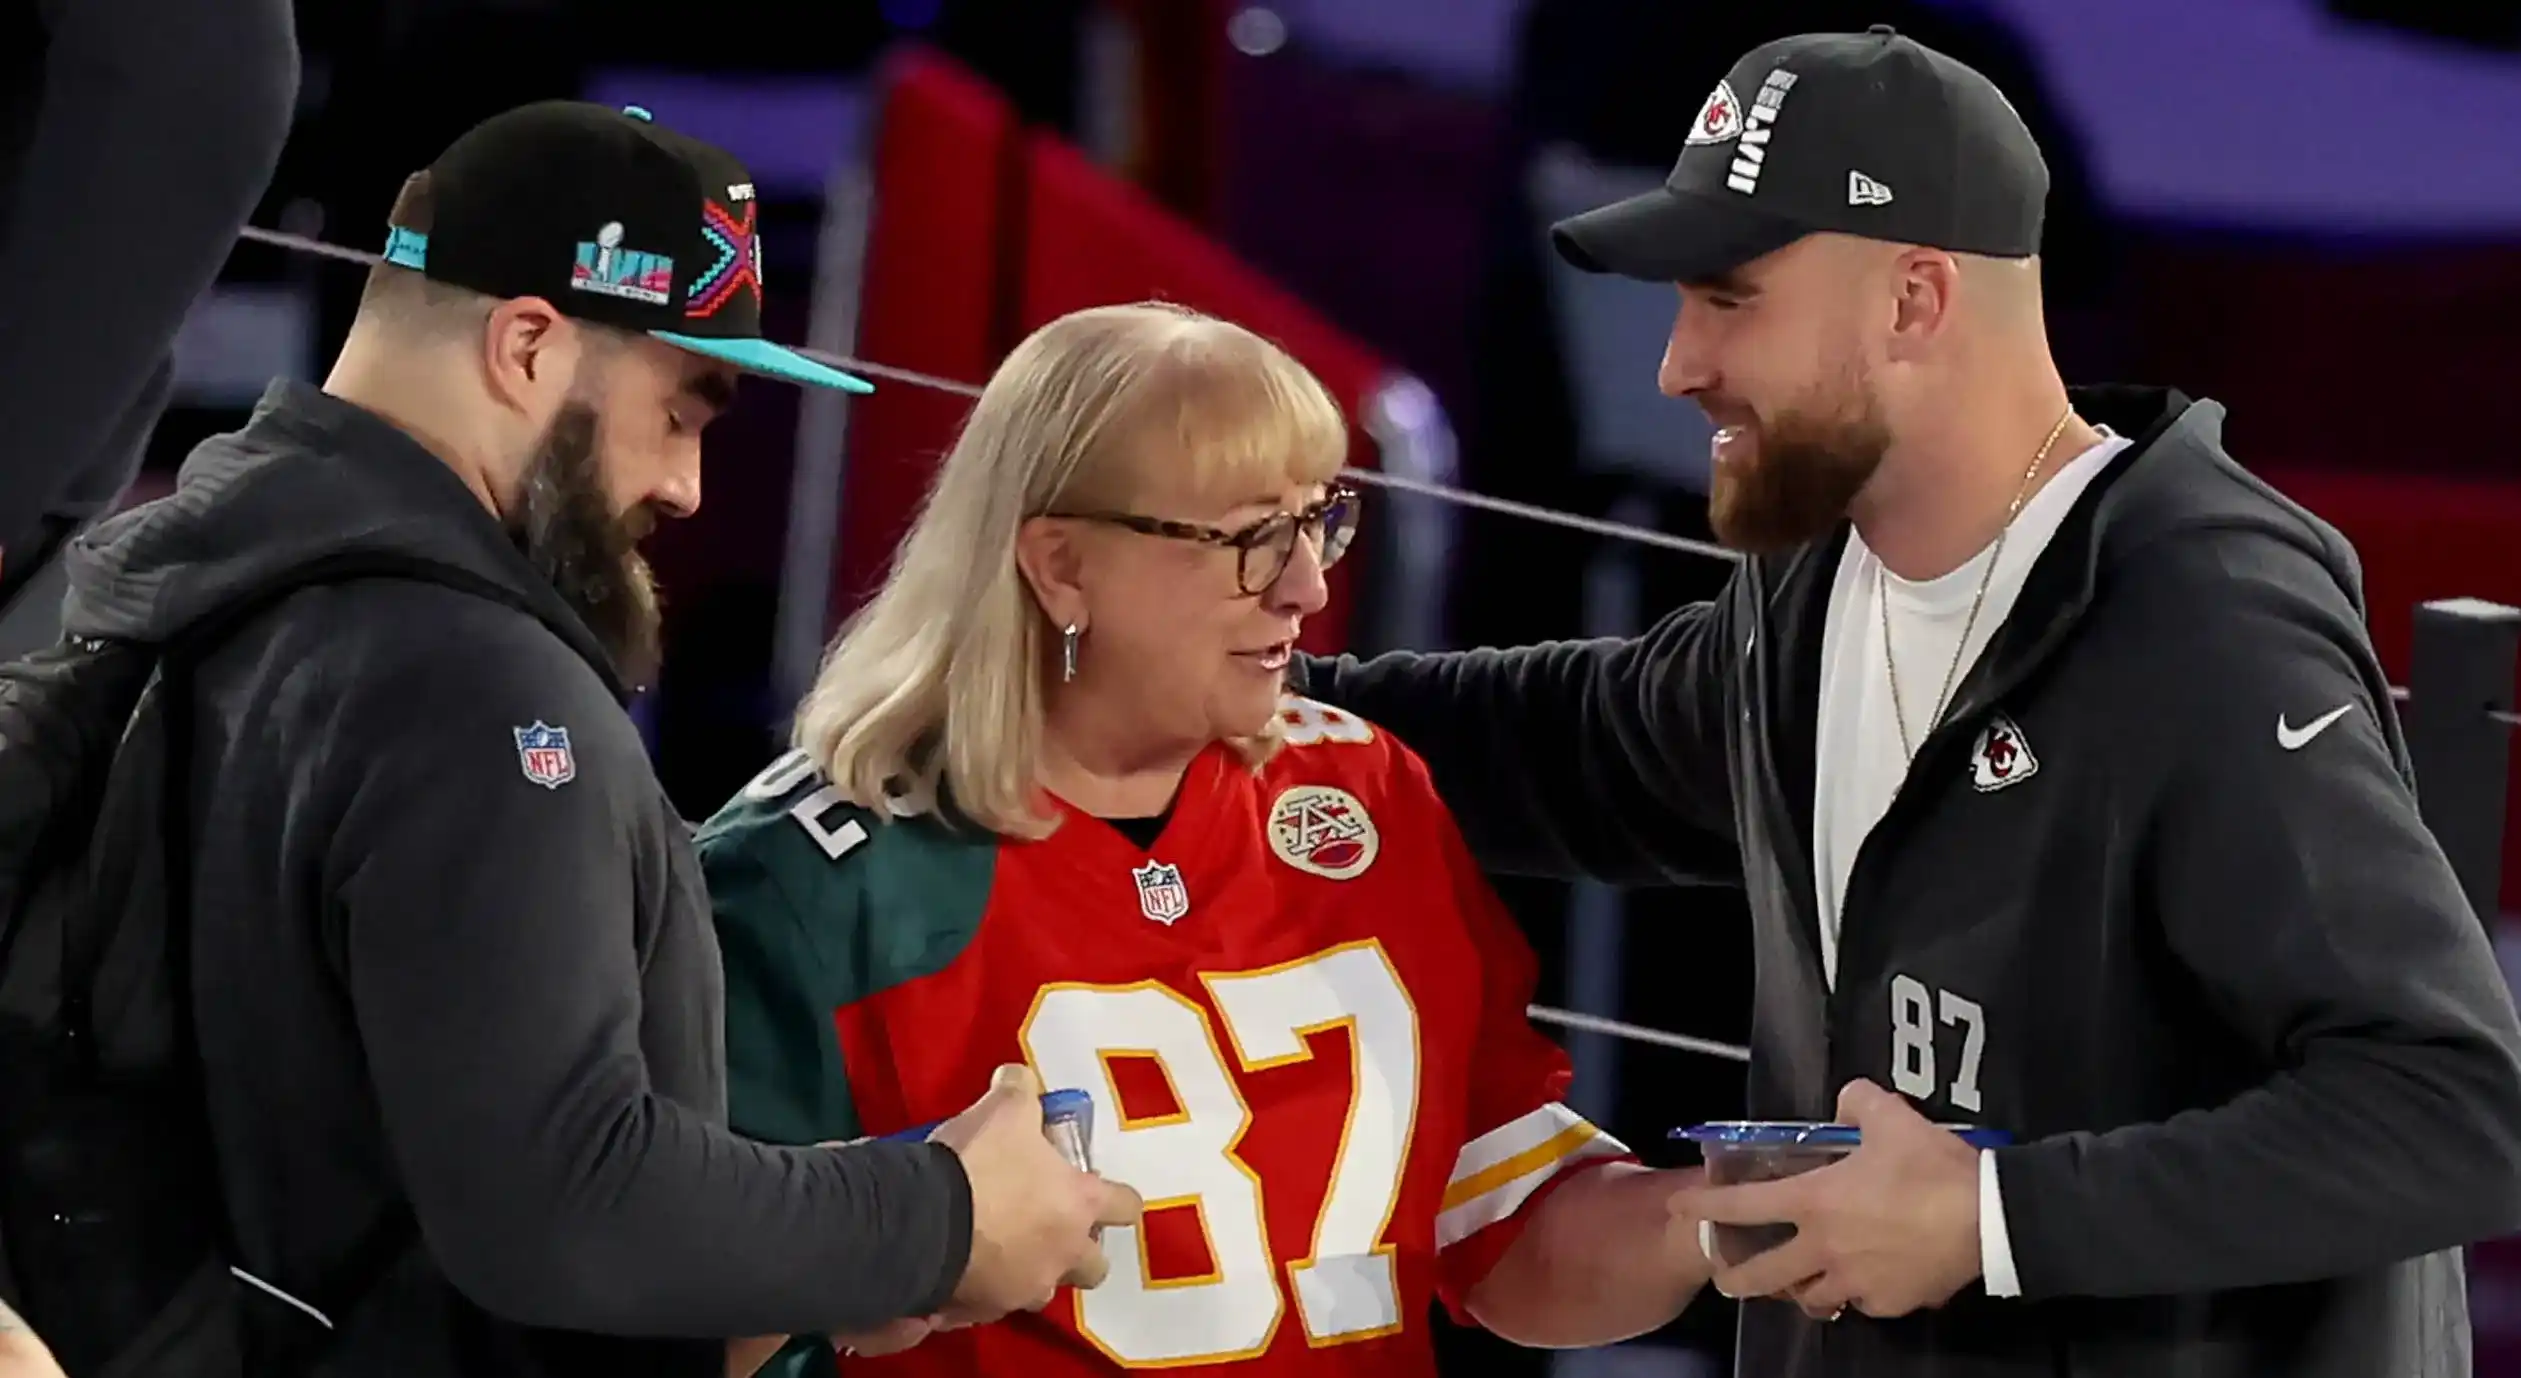 Donna Kelce, Jason's mother, discussed his profession before his retirement.